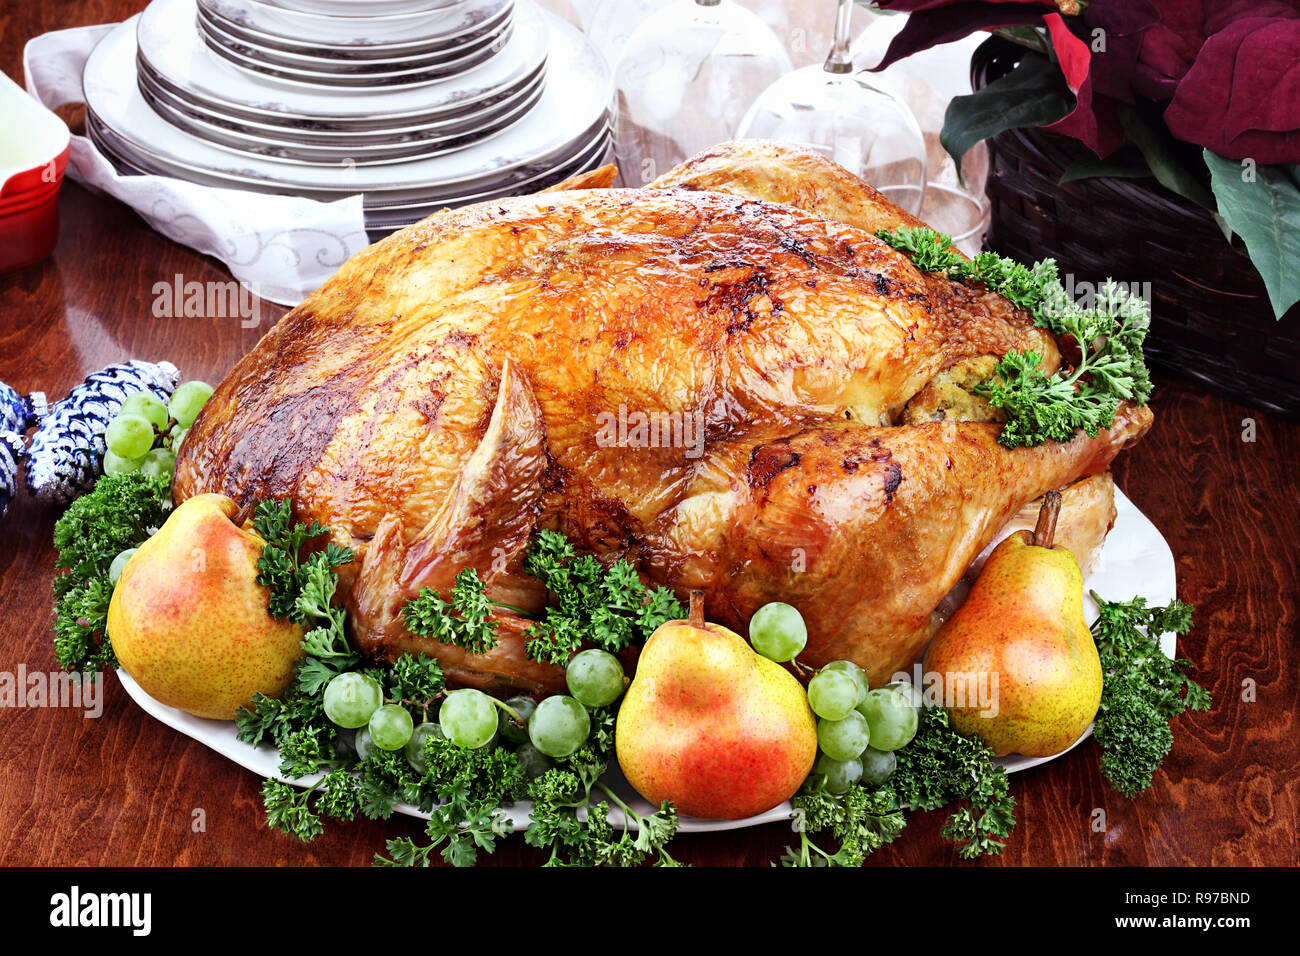 Thanksgiving or Christmas turkey dinner with fresh pears, grapes and parsley. Poinsettia flower arrangement, dishes and wine glasses in background. Stock Photo